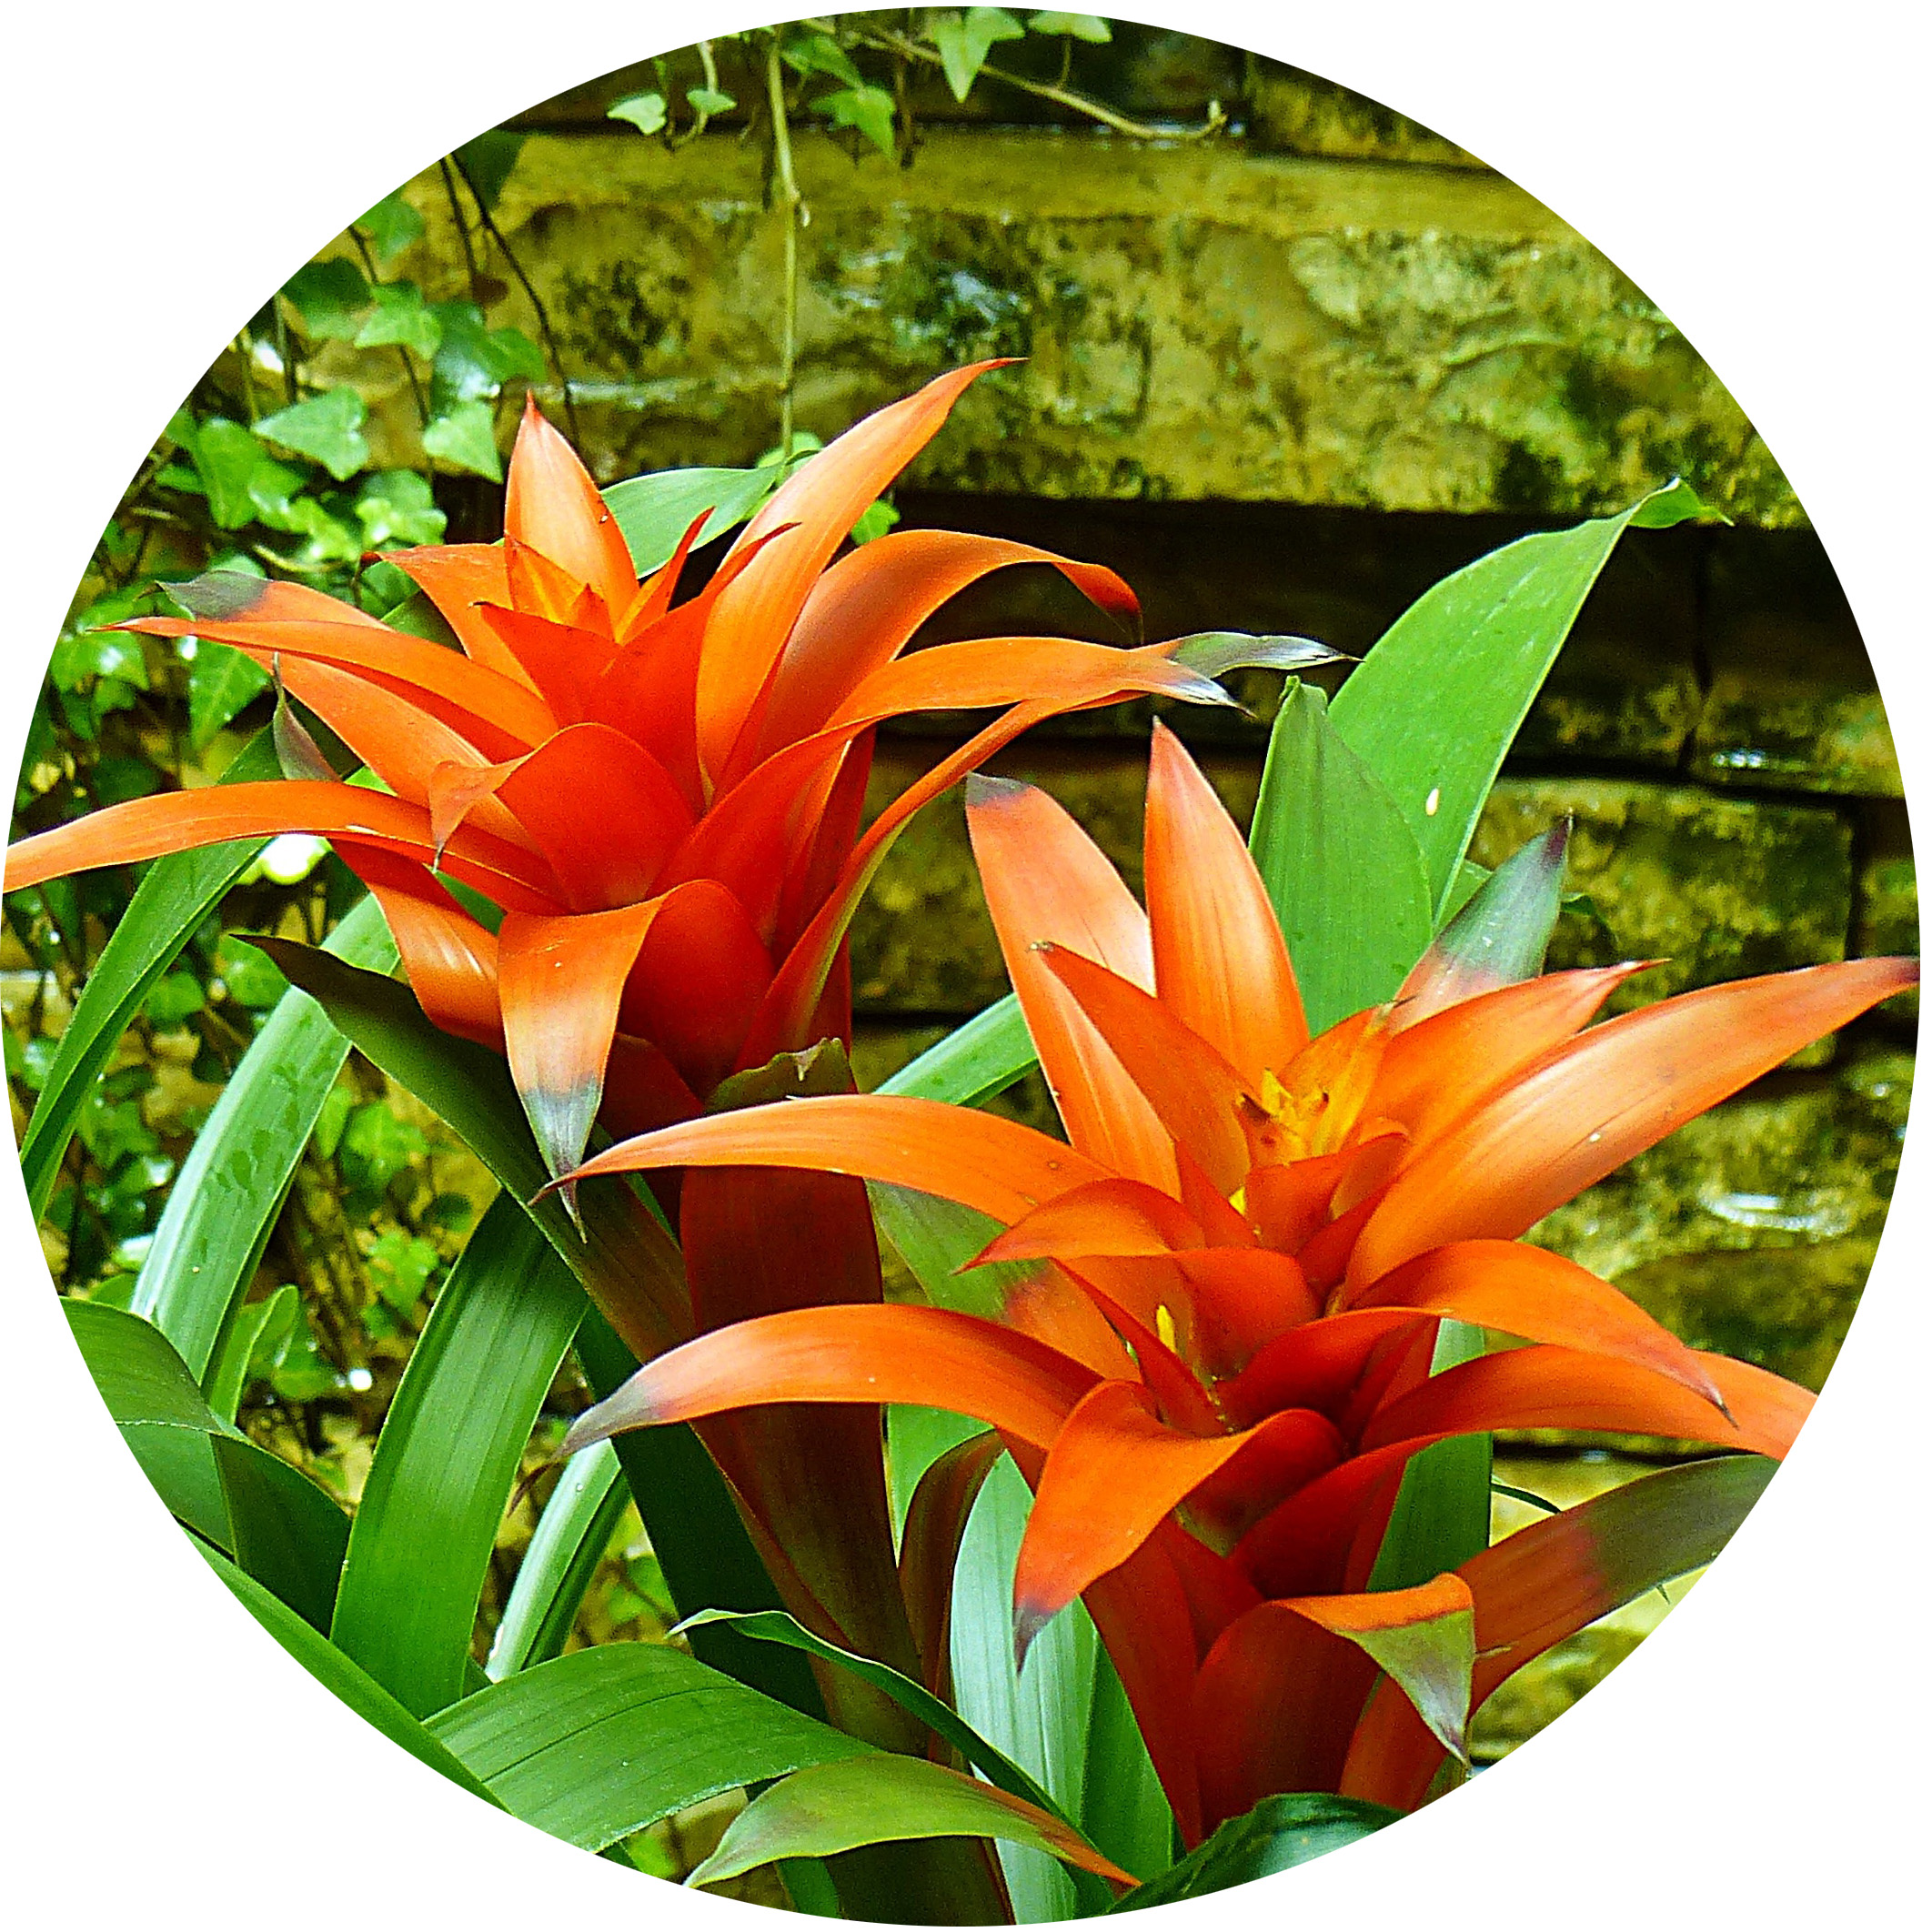 Bromeliad Growing Guide - How to Care for Bromeliads - KidsGardening